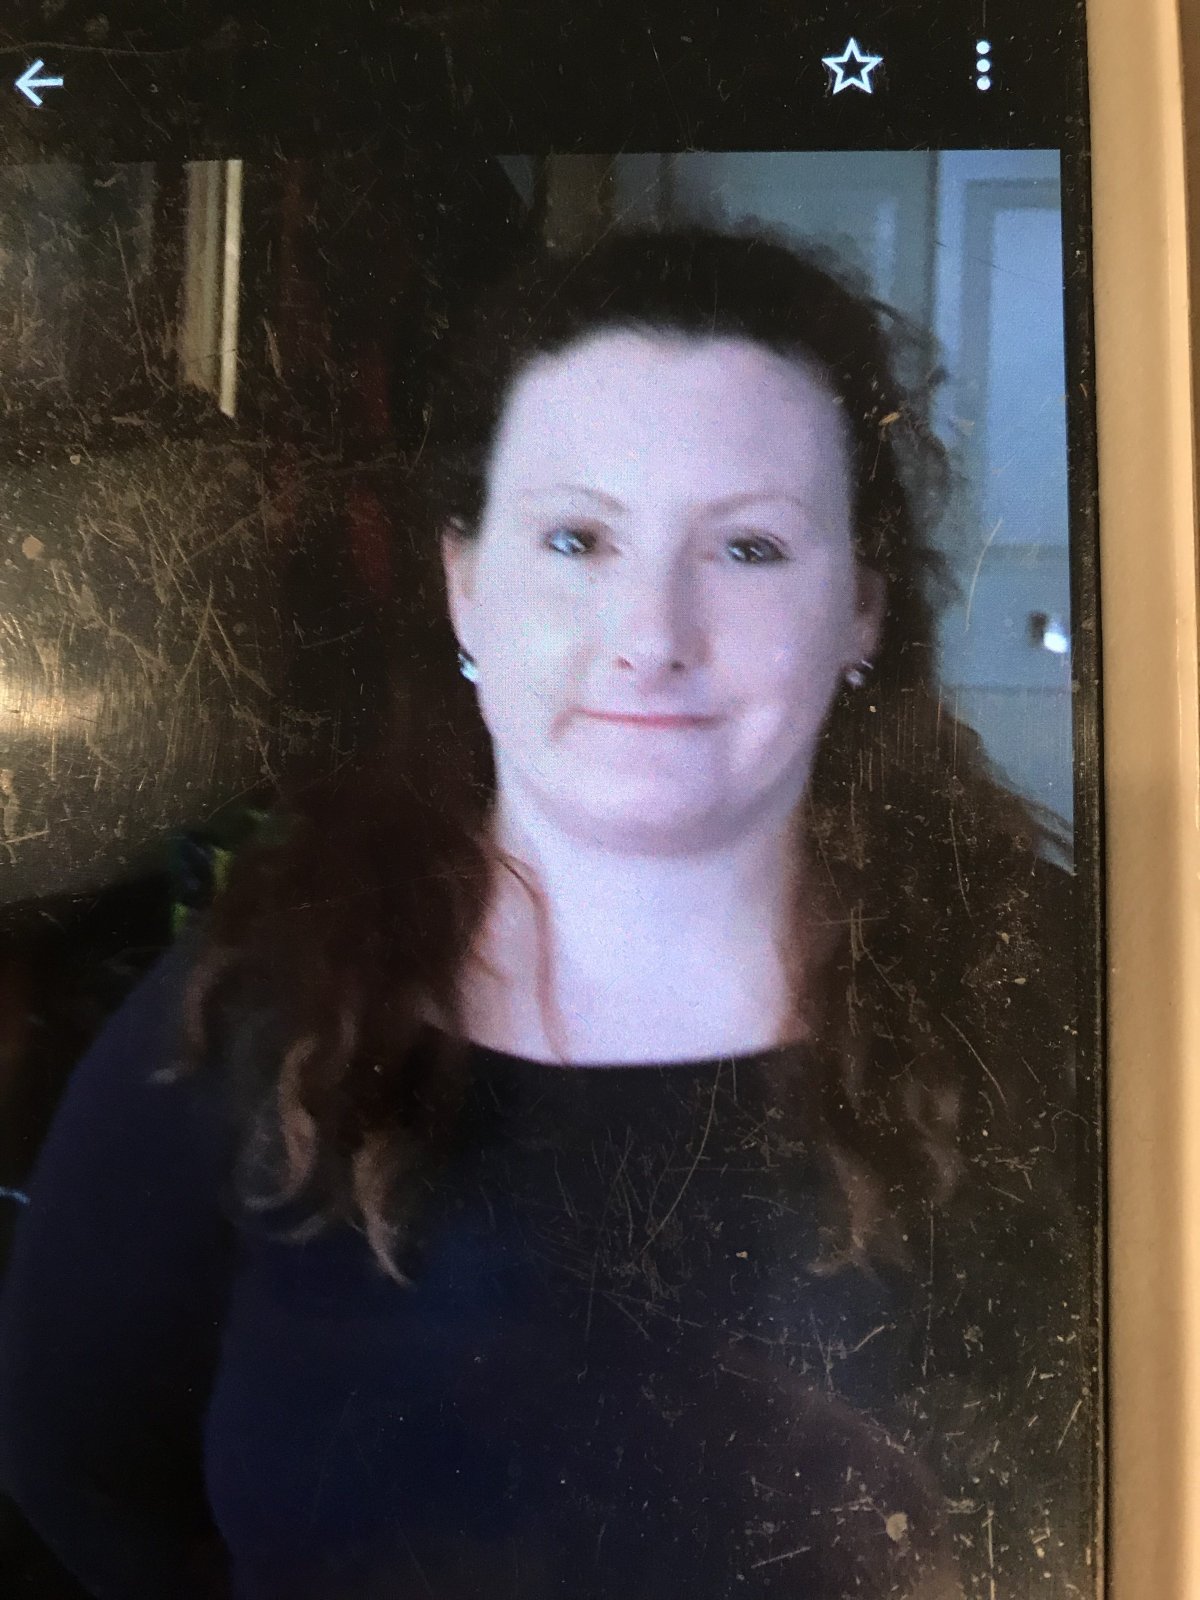 Dori MacIntosh was last seen Tuesday afternoon when she was dropped off by taxi at the TD Bank on Parkedale Avenue in Brockville.